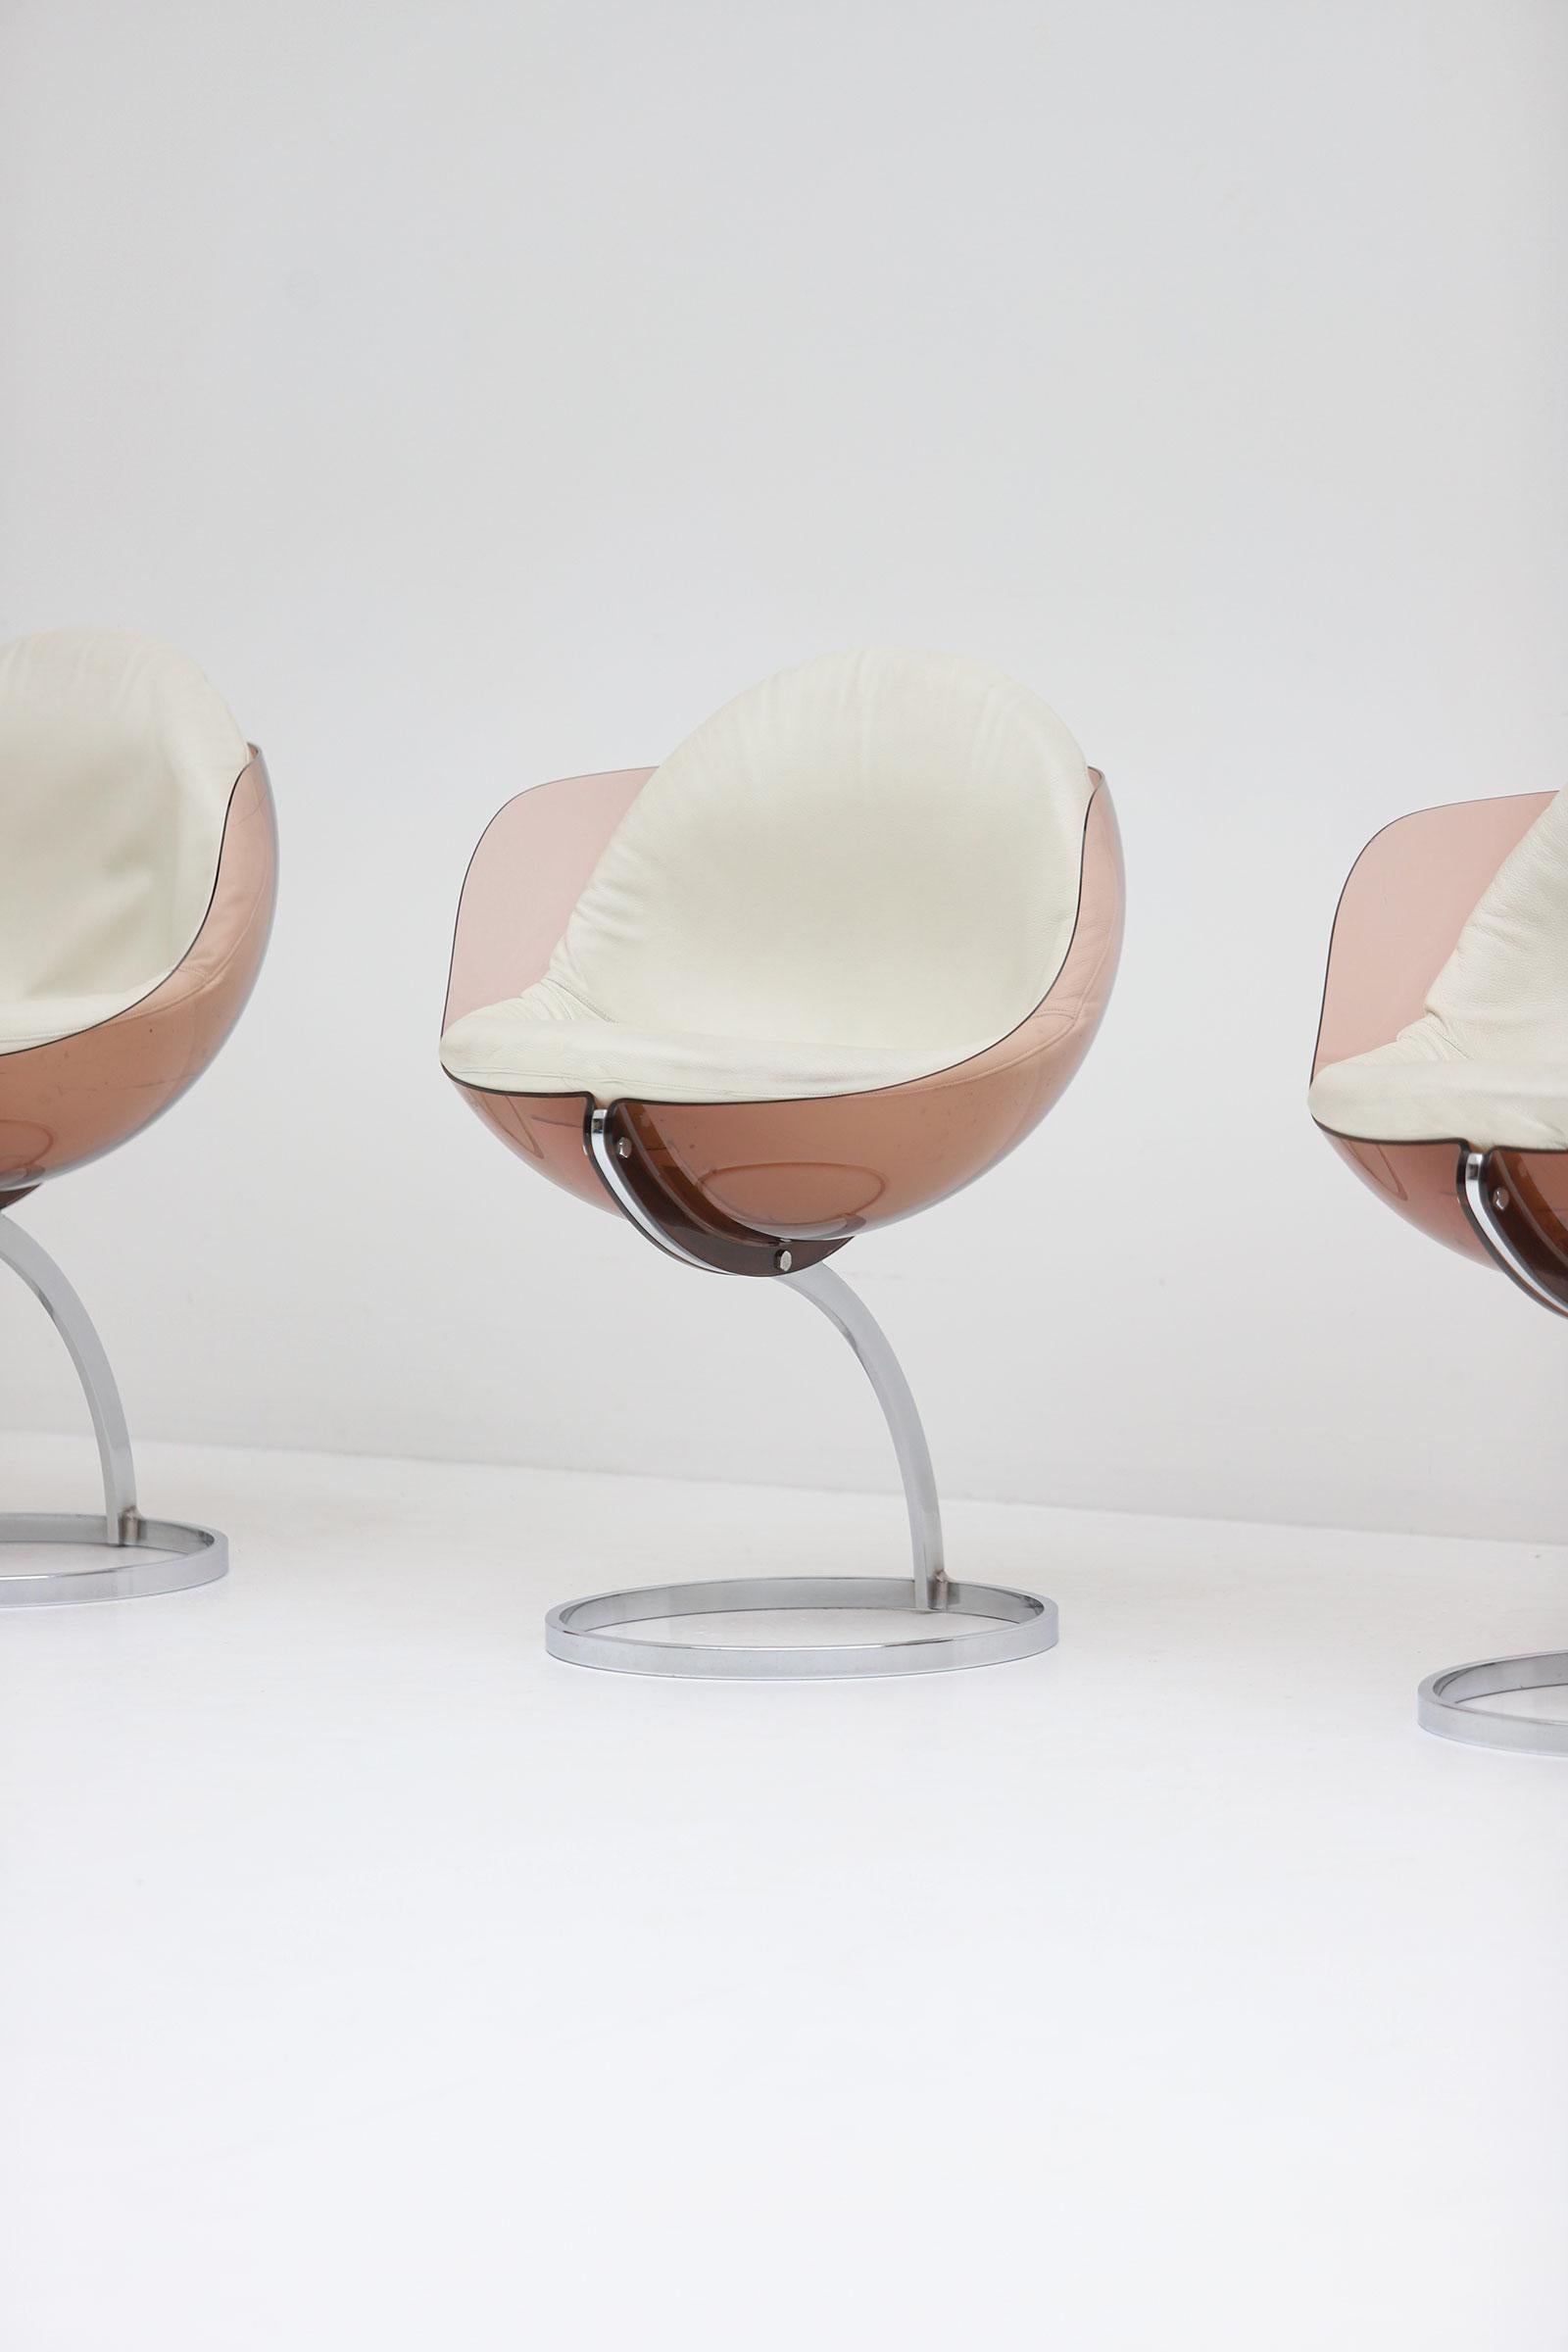 French Set of 5 Sphere Chairs Designed by Boris Tabacoff, 1971